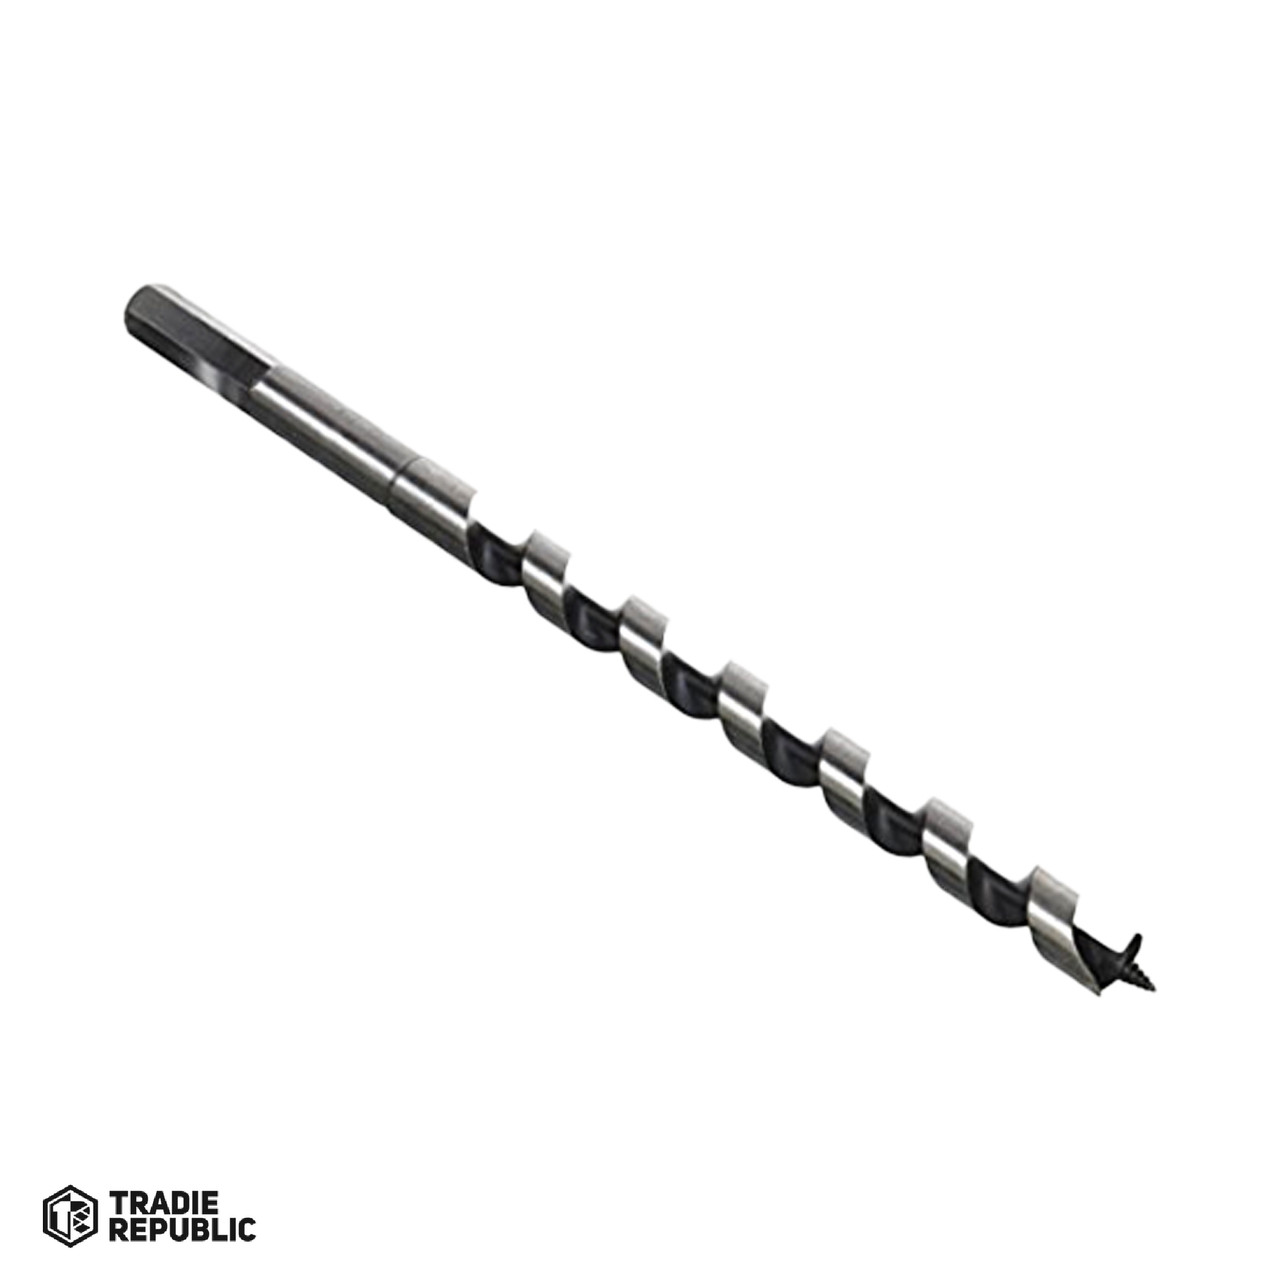 D-53475 Makita Single Spur Auger Bit with Straight Shank